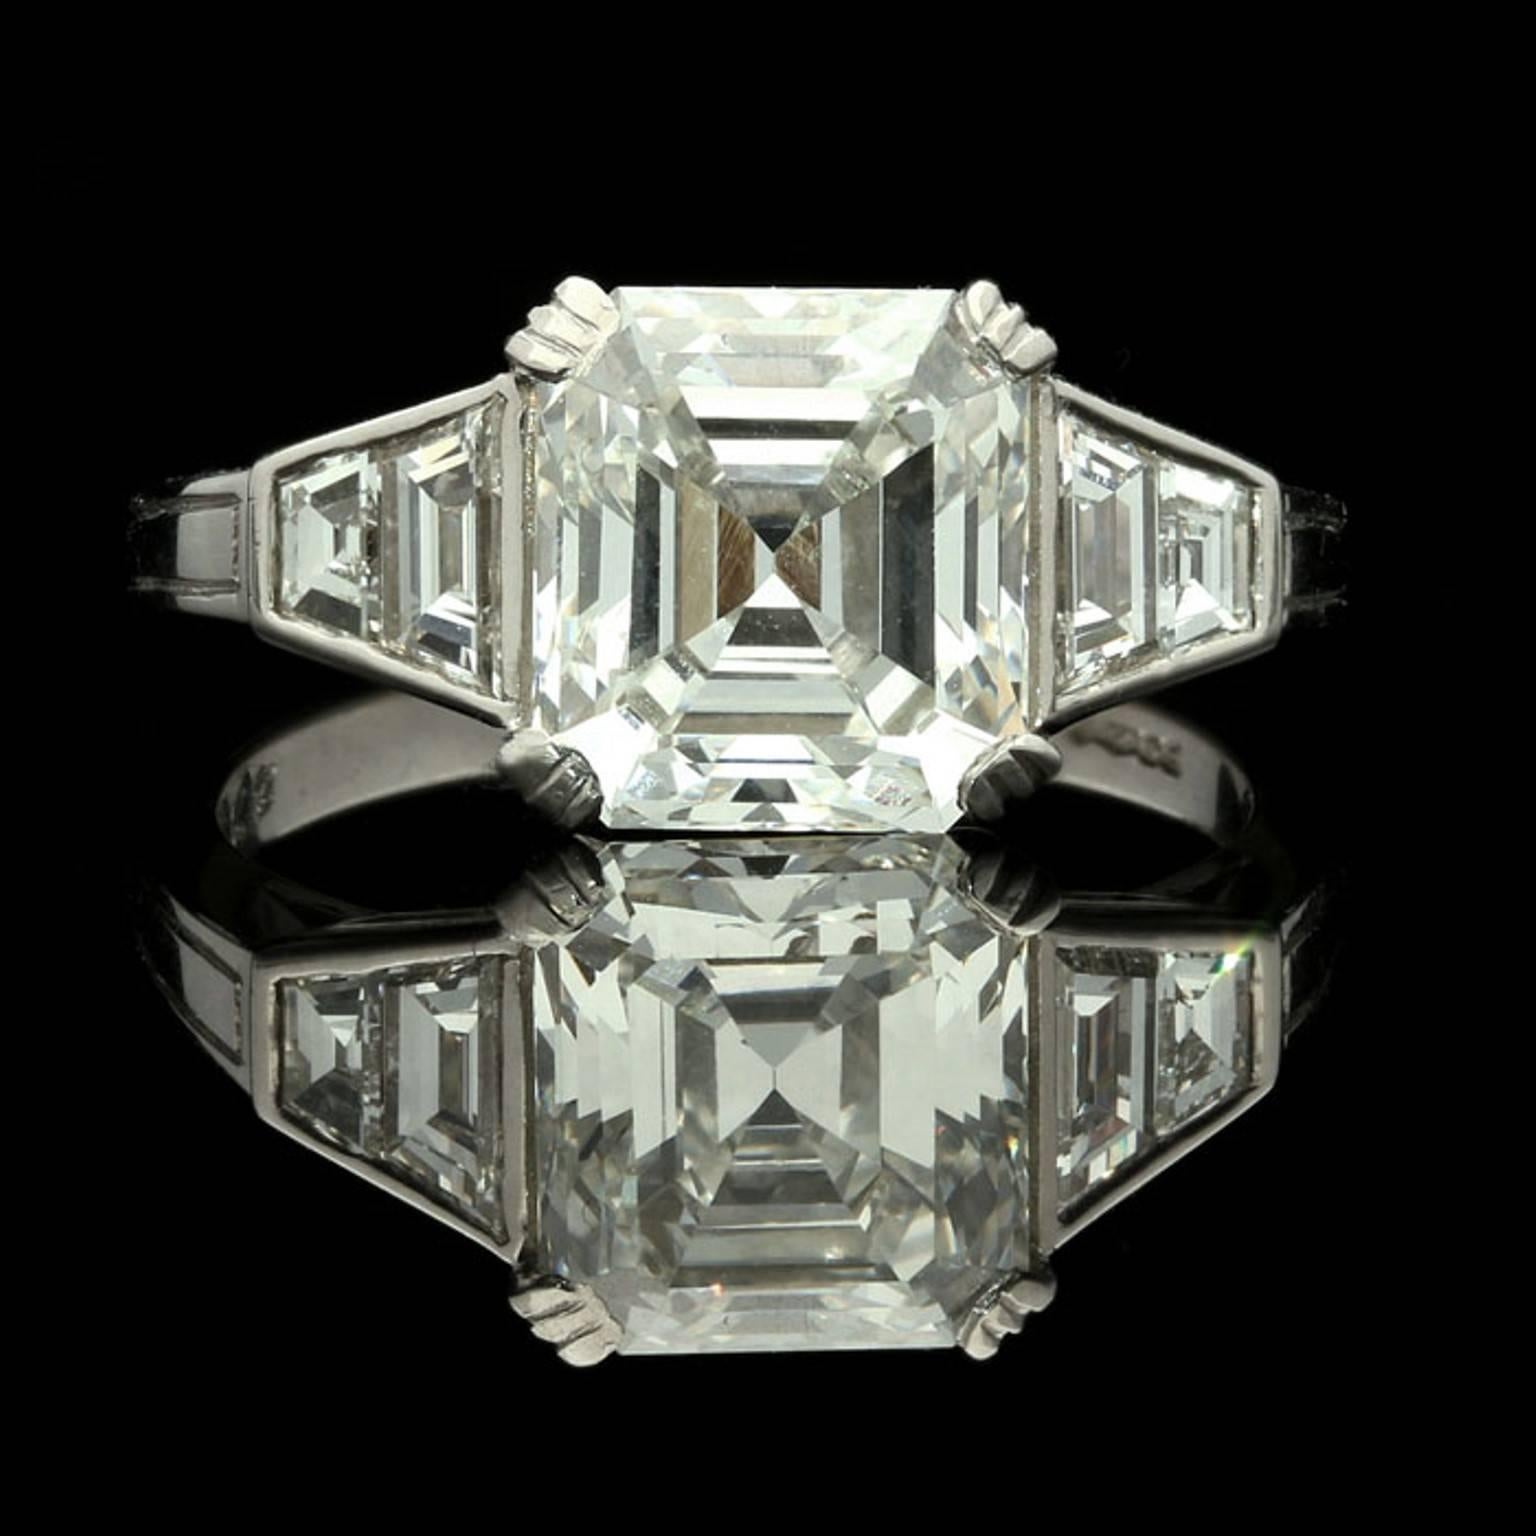 A stunning Asscher diamond ring by Hancocks, set to the centre with a beautiful Asscher cut diamond weighing 2.77 carat corner claw set between elegantly tapering shoulders each with two rub over set trapezoid diamonds, all in a finely handmade